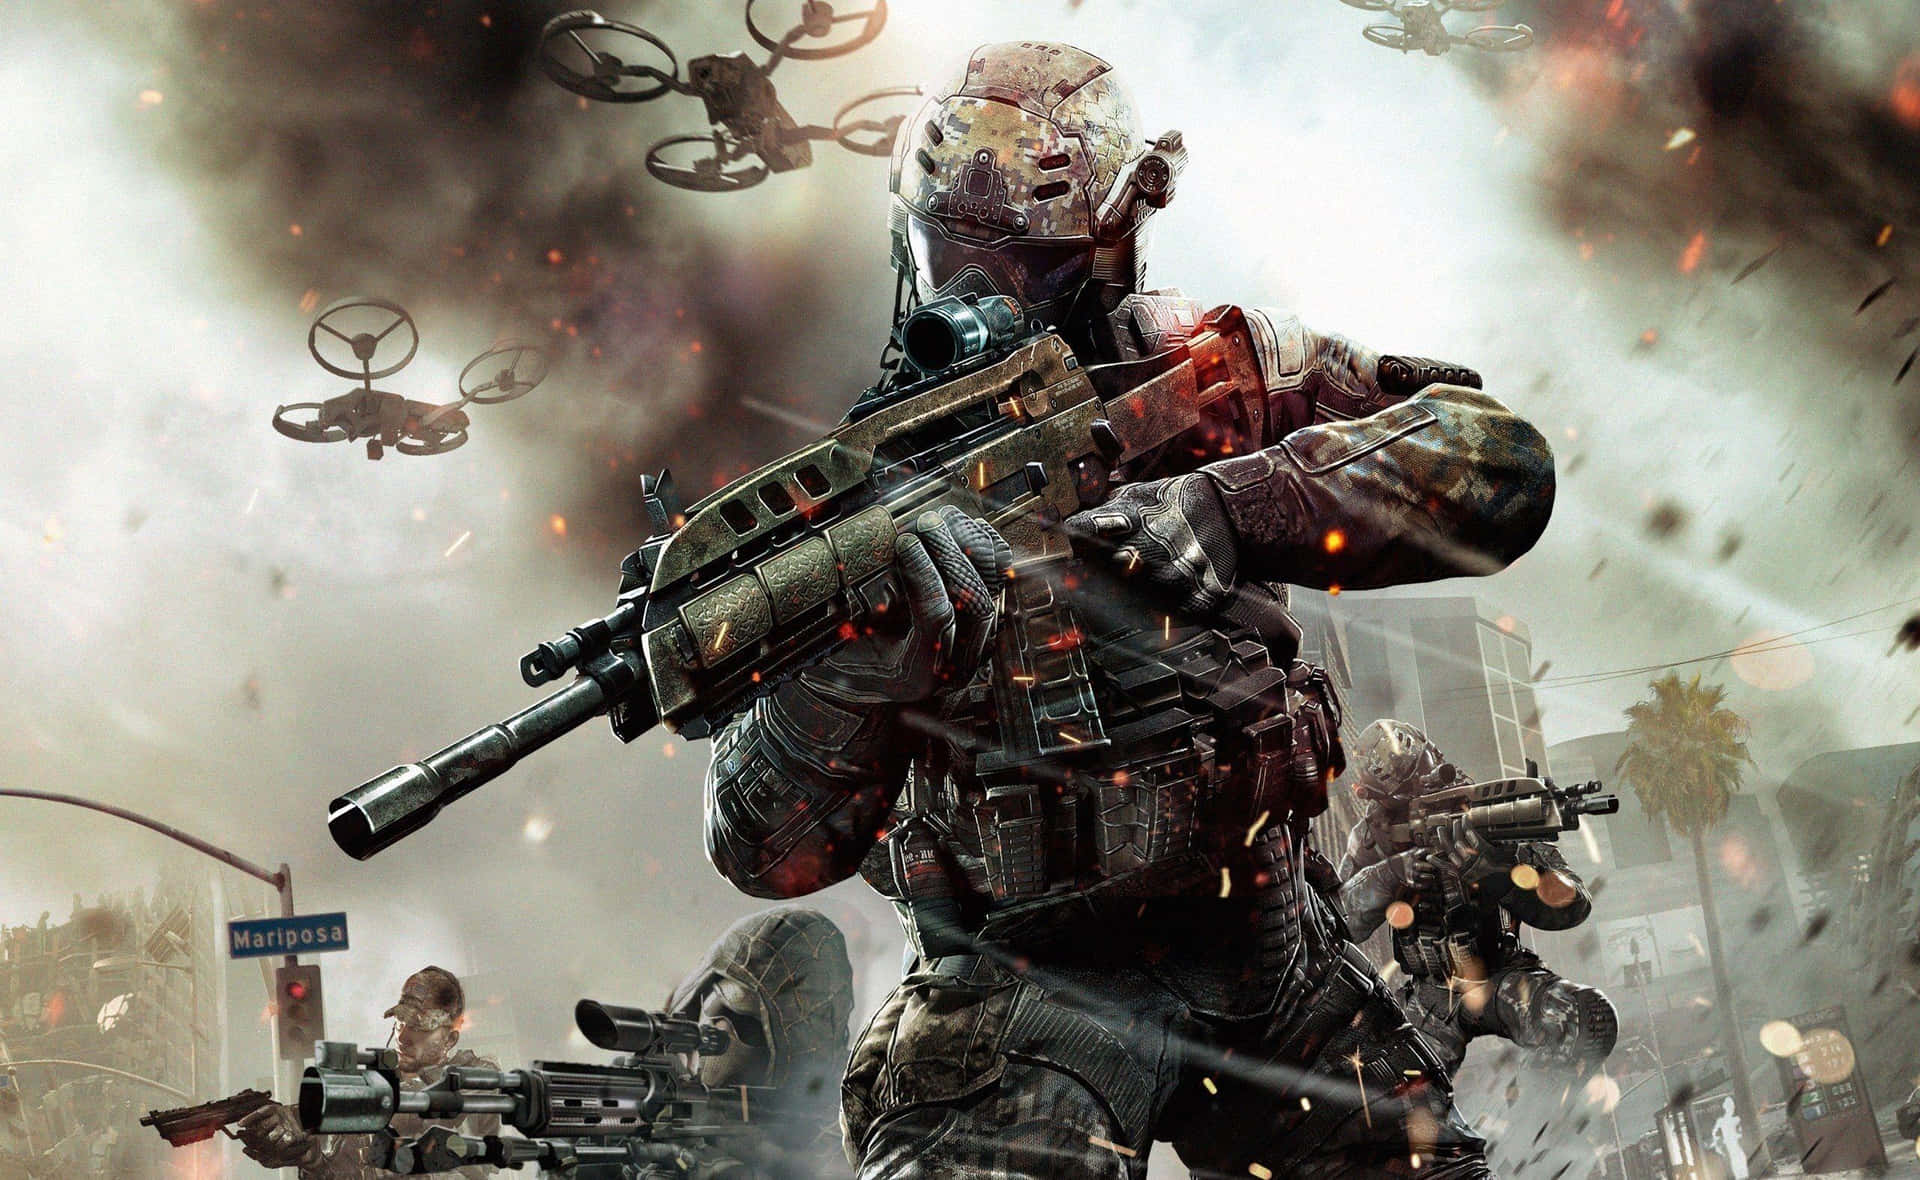 Experience intense Multiplayer Combat in Call of Duty